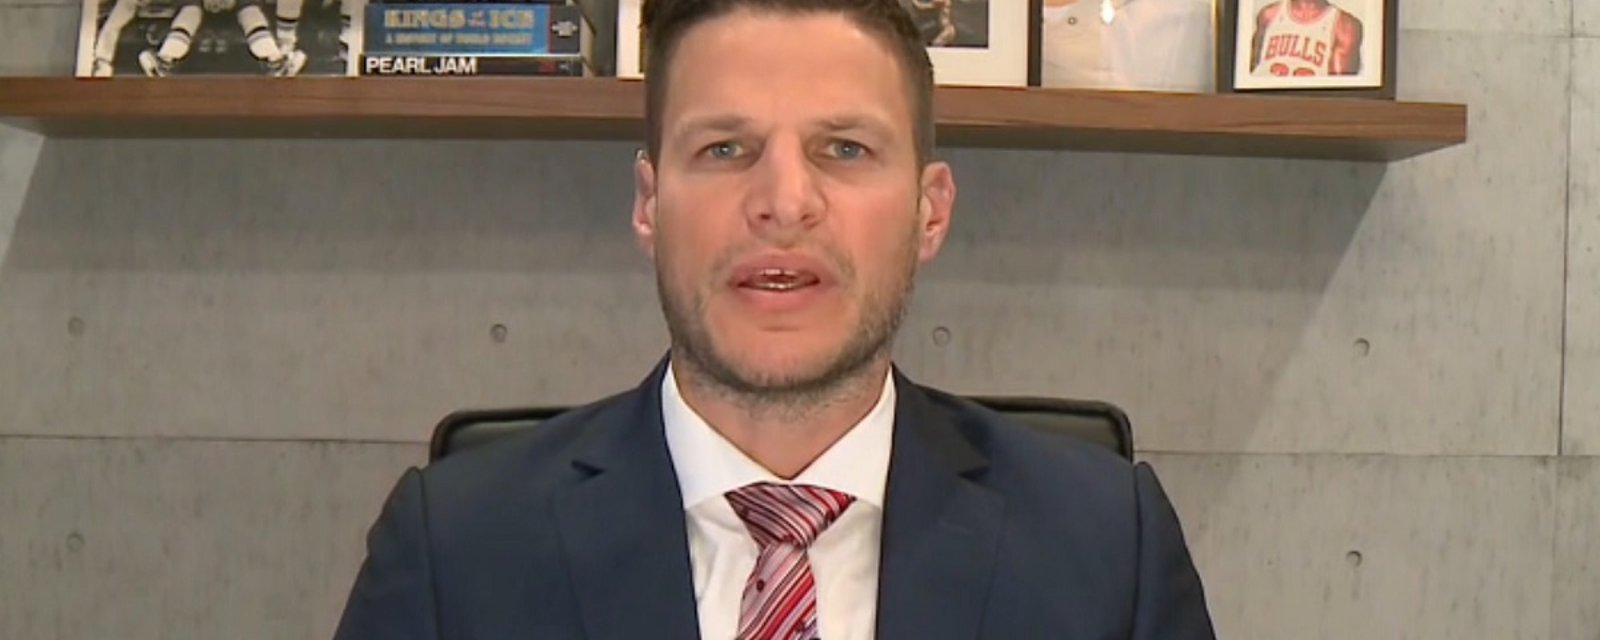 Kevin Bieksa steps up his game with 3 hilarious photos on HNIC.